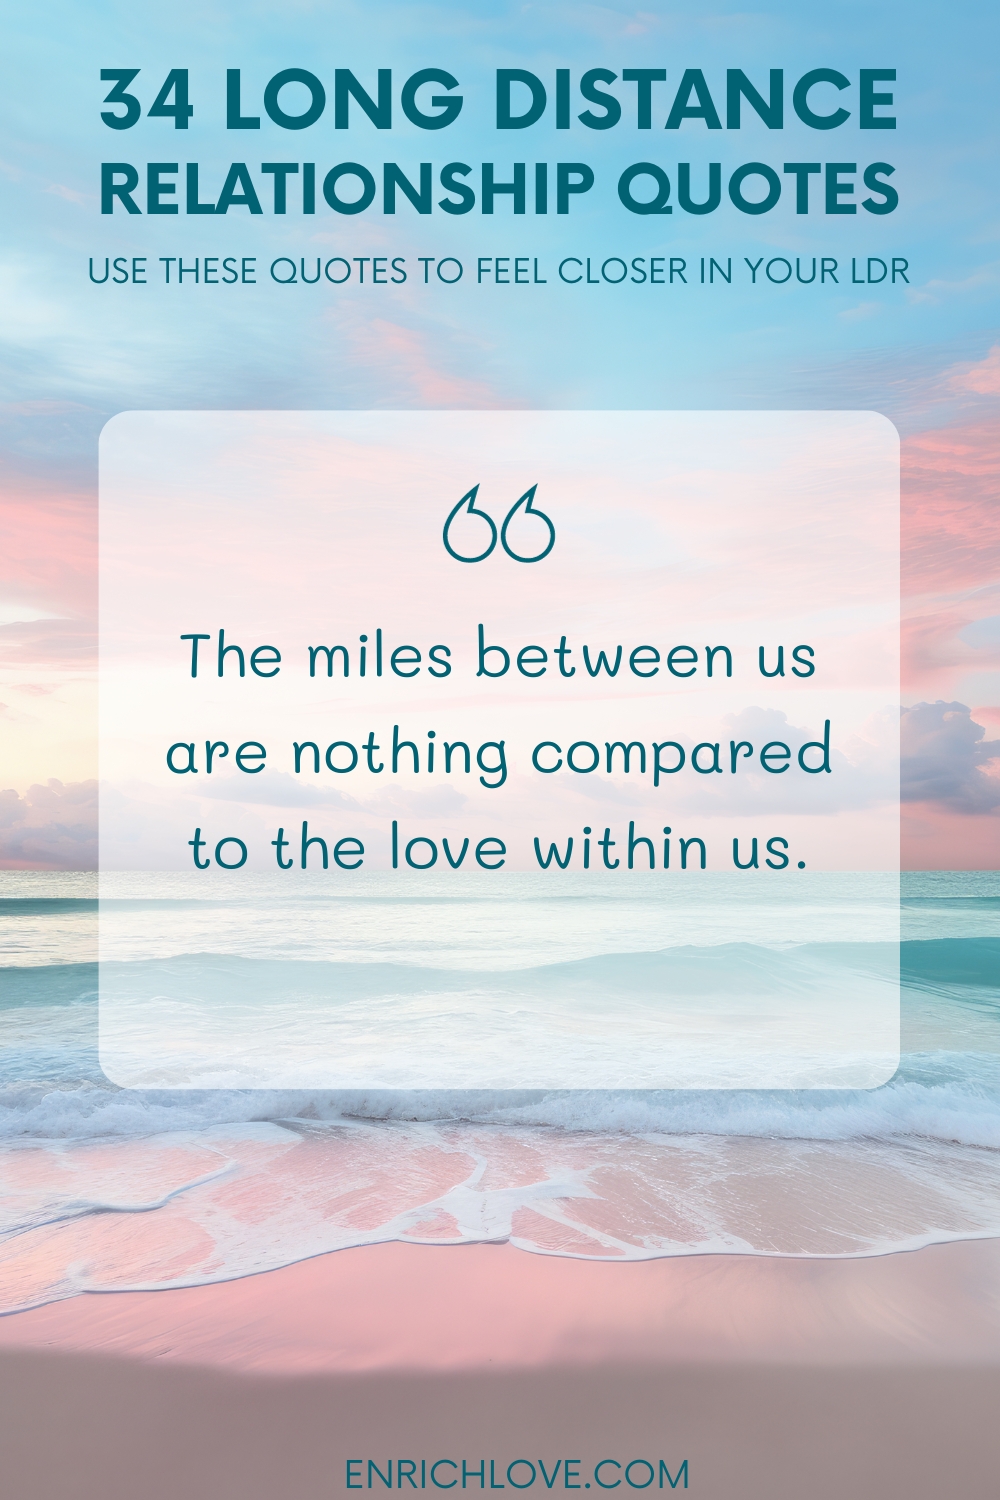 34 Long Distance Relationship Quotes - The miles between us are nothing compared to the love within us.